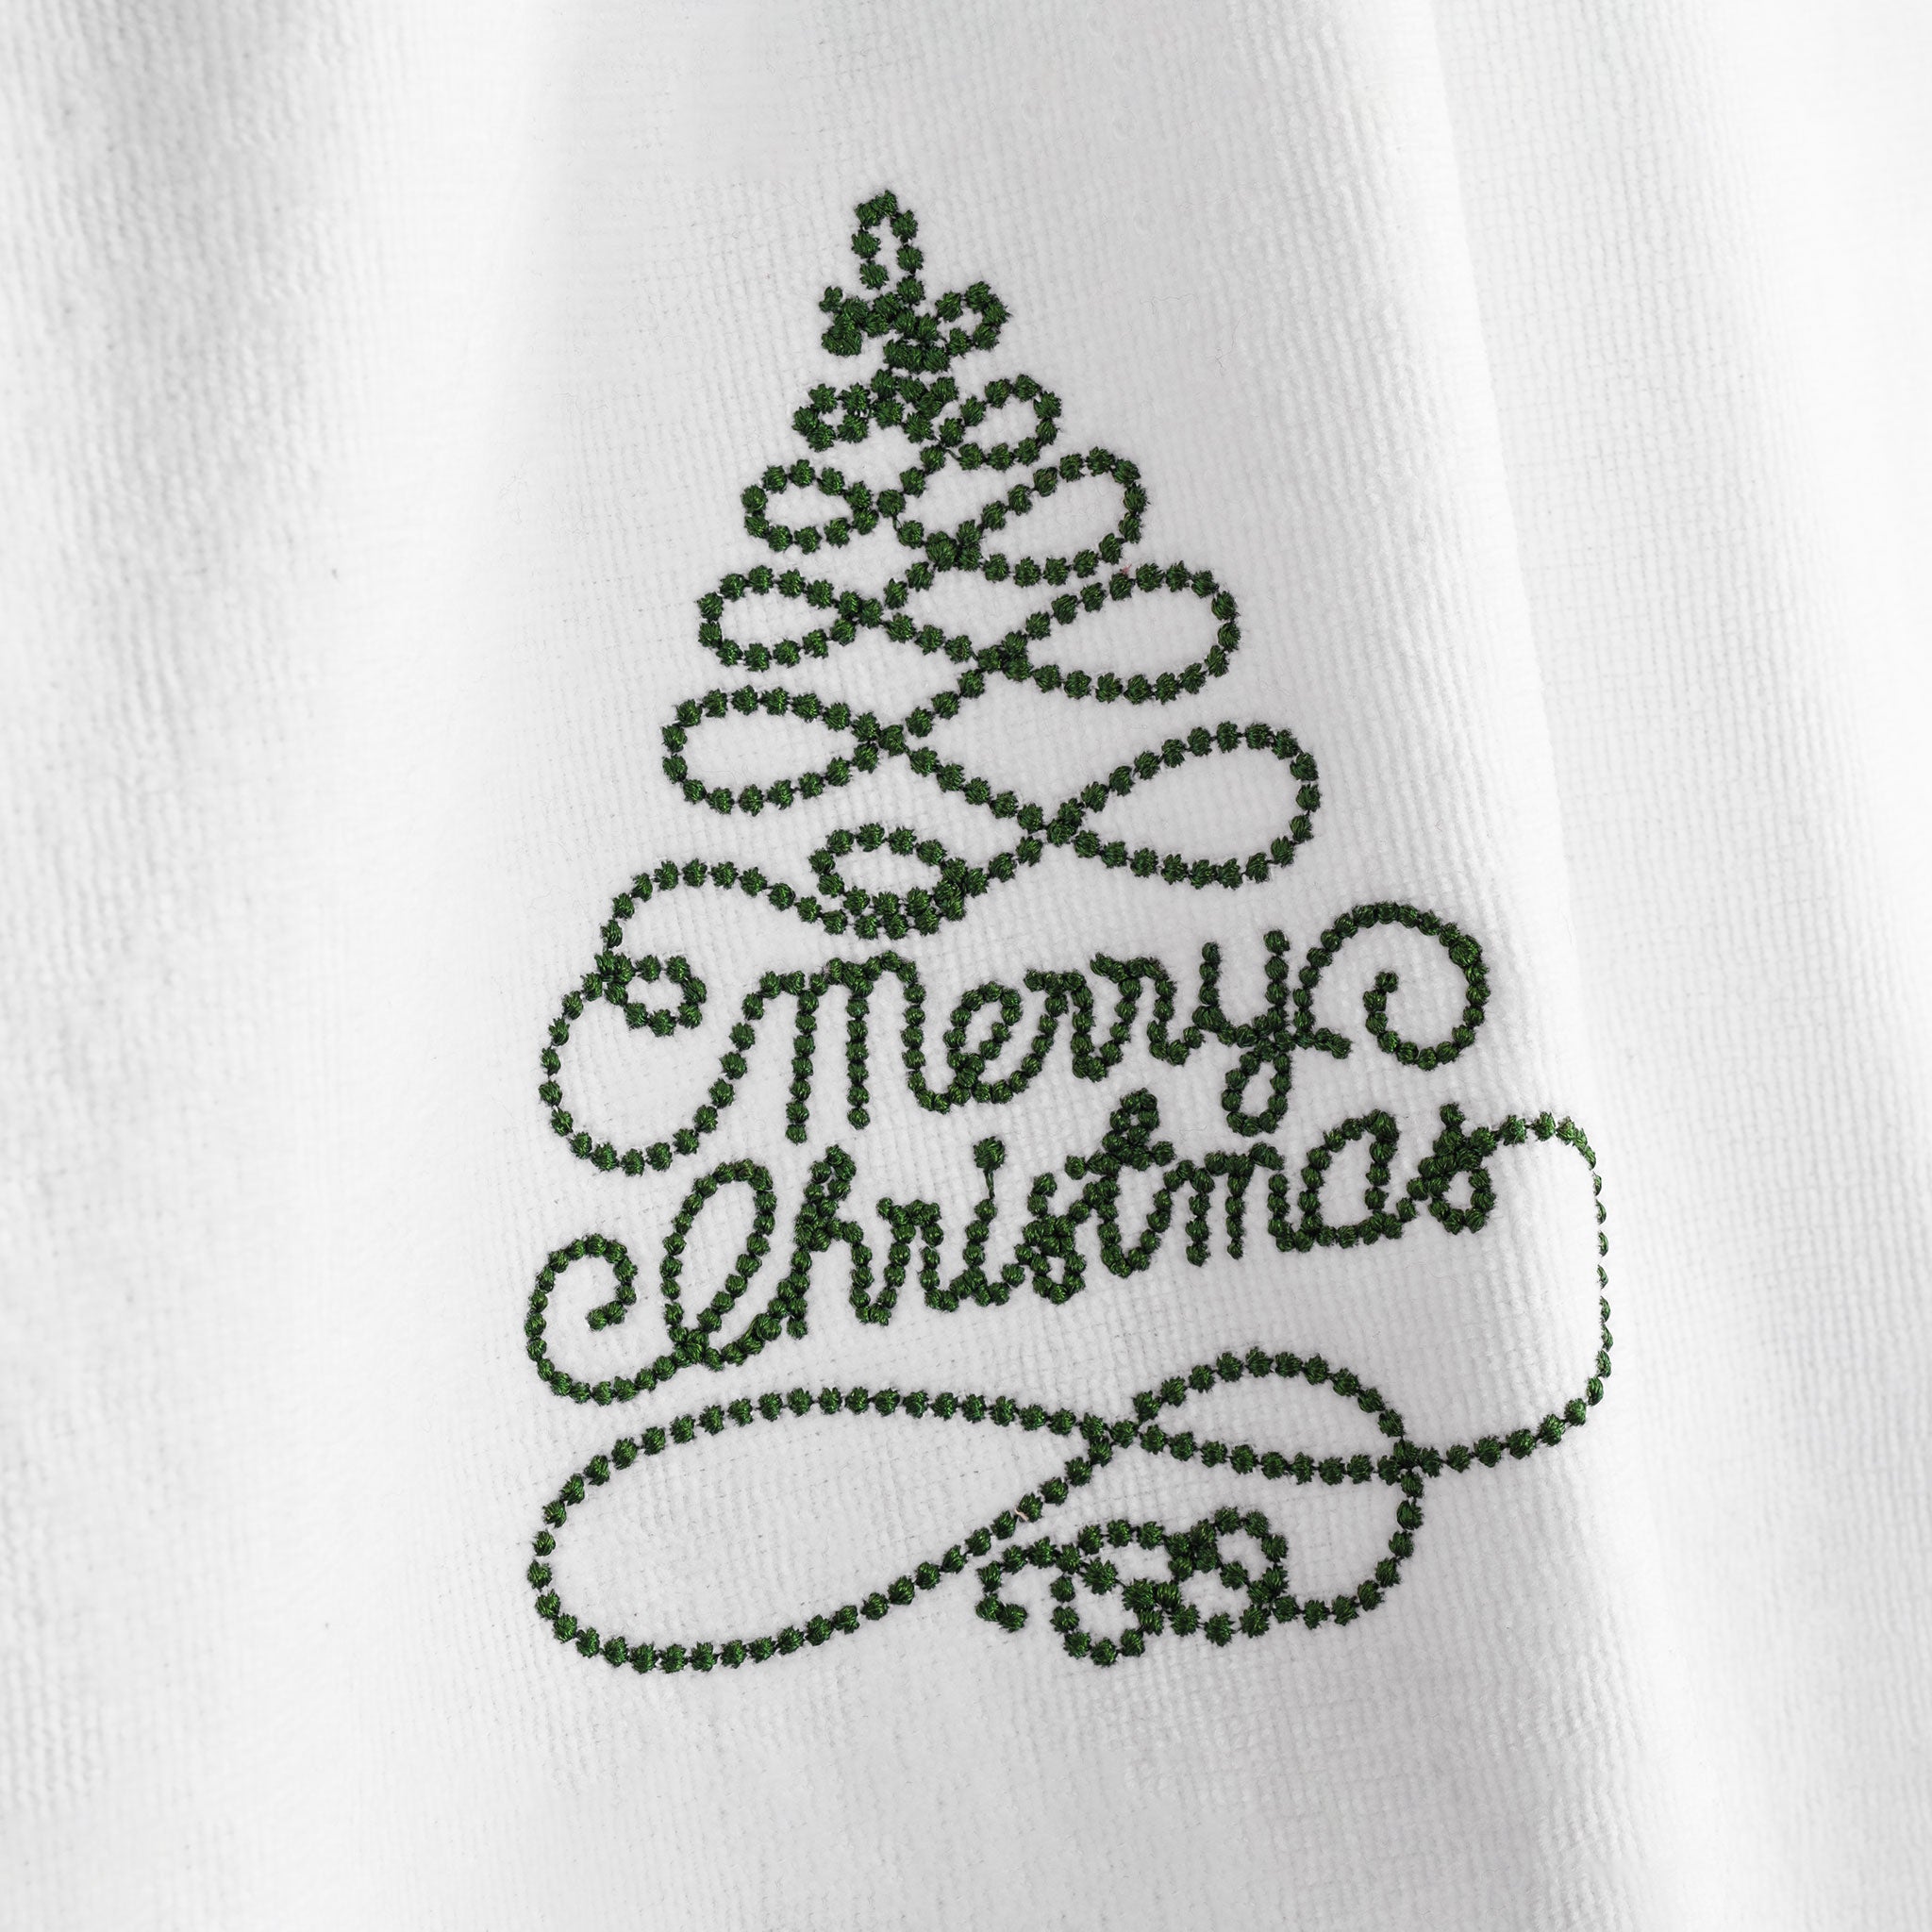 American Soft Linen - Christmas Towels 2  Packed Embroidered Towels for Decor Xmas - 60 Set Case Pack - Merry Tree-Deery - 4